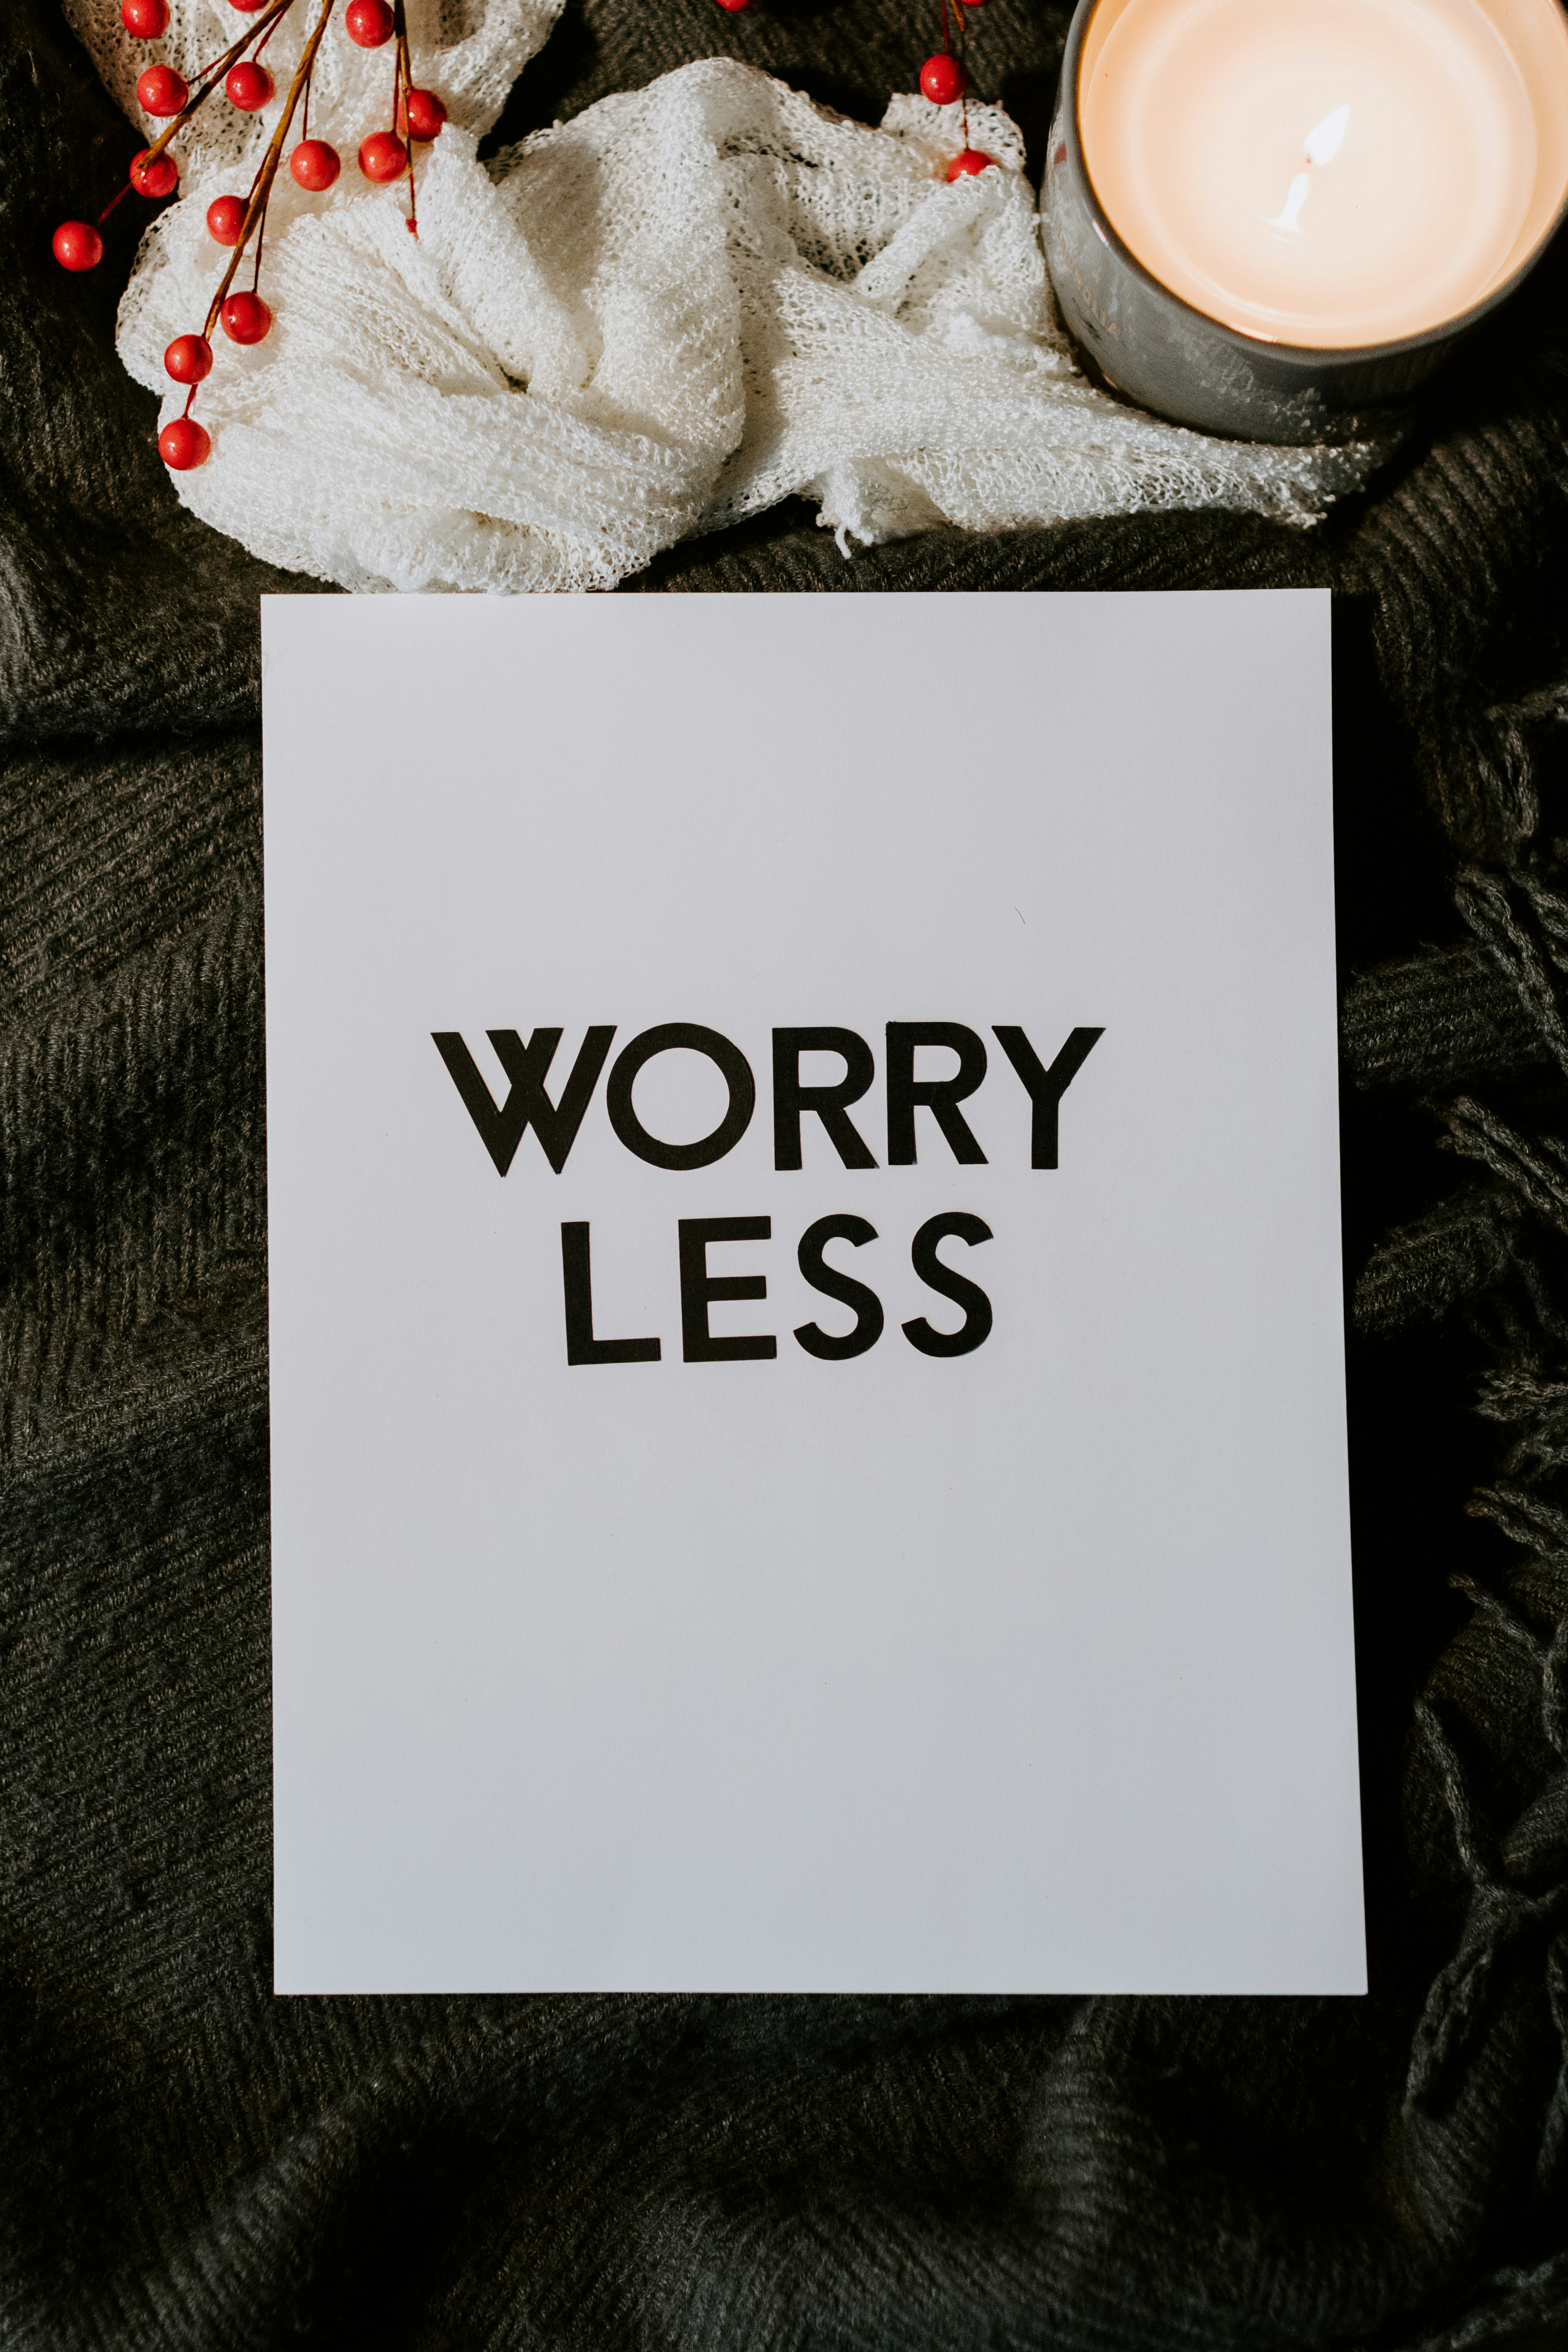 Worry less page